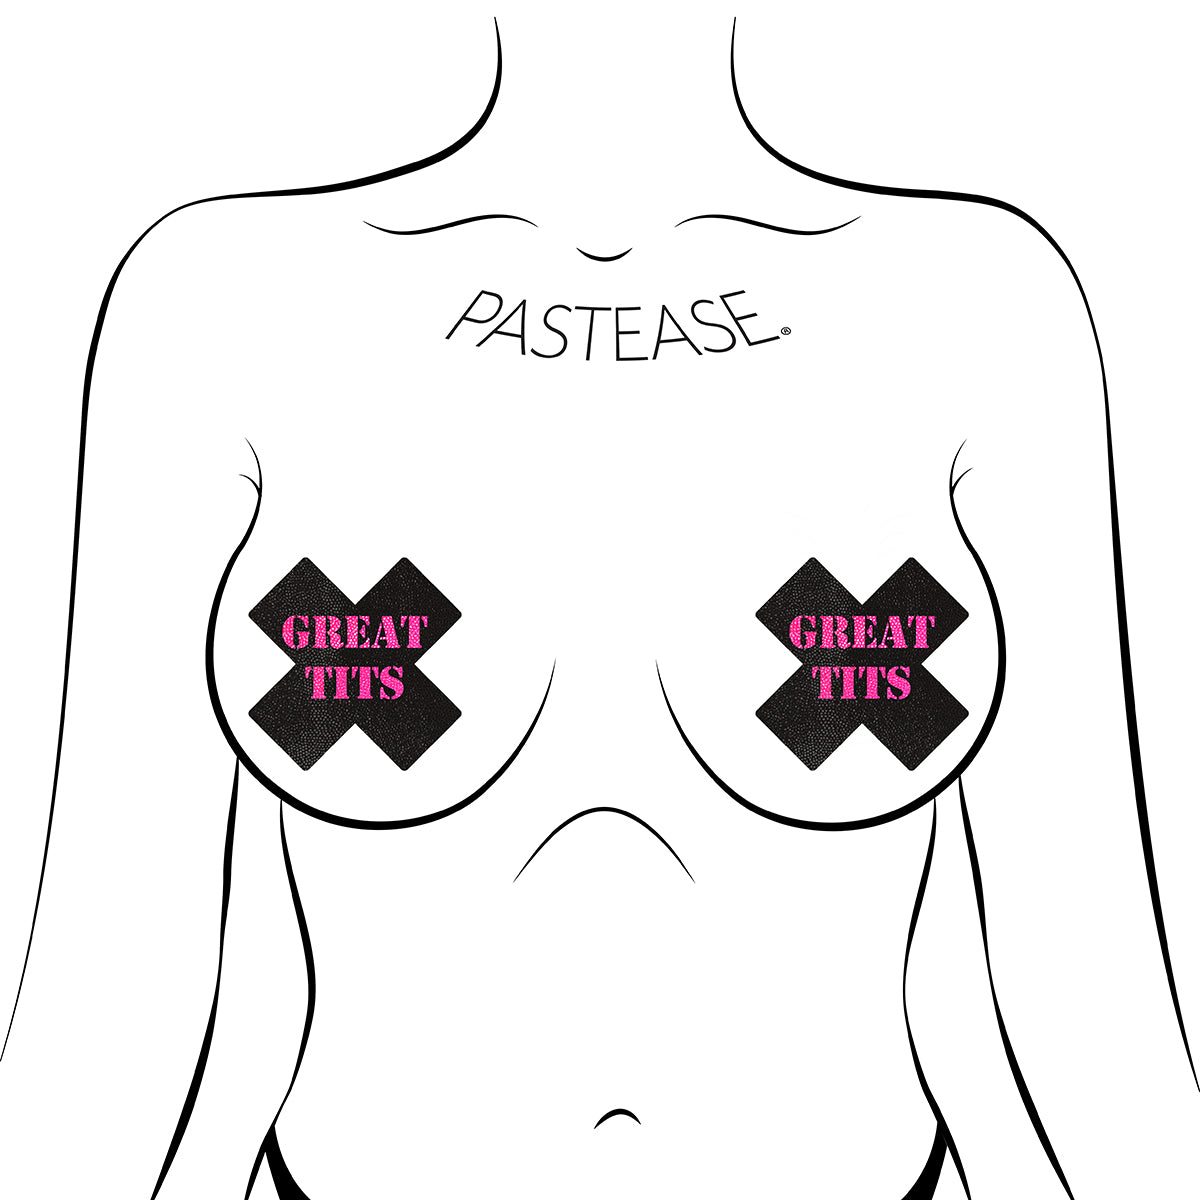 Pastease Great Tits Crosses